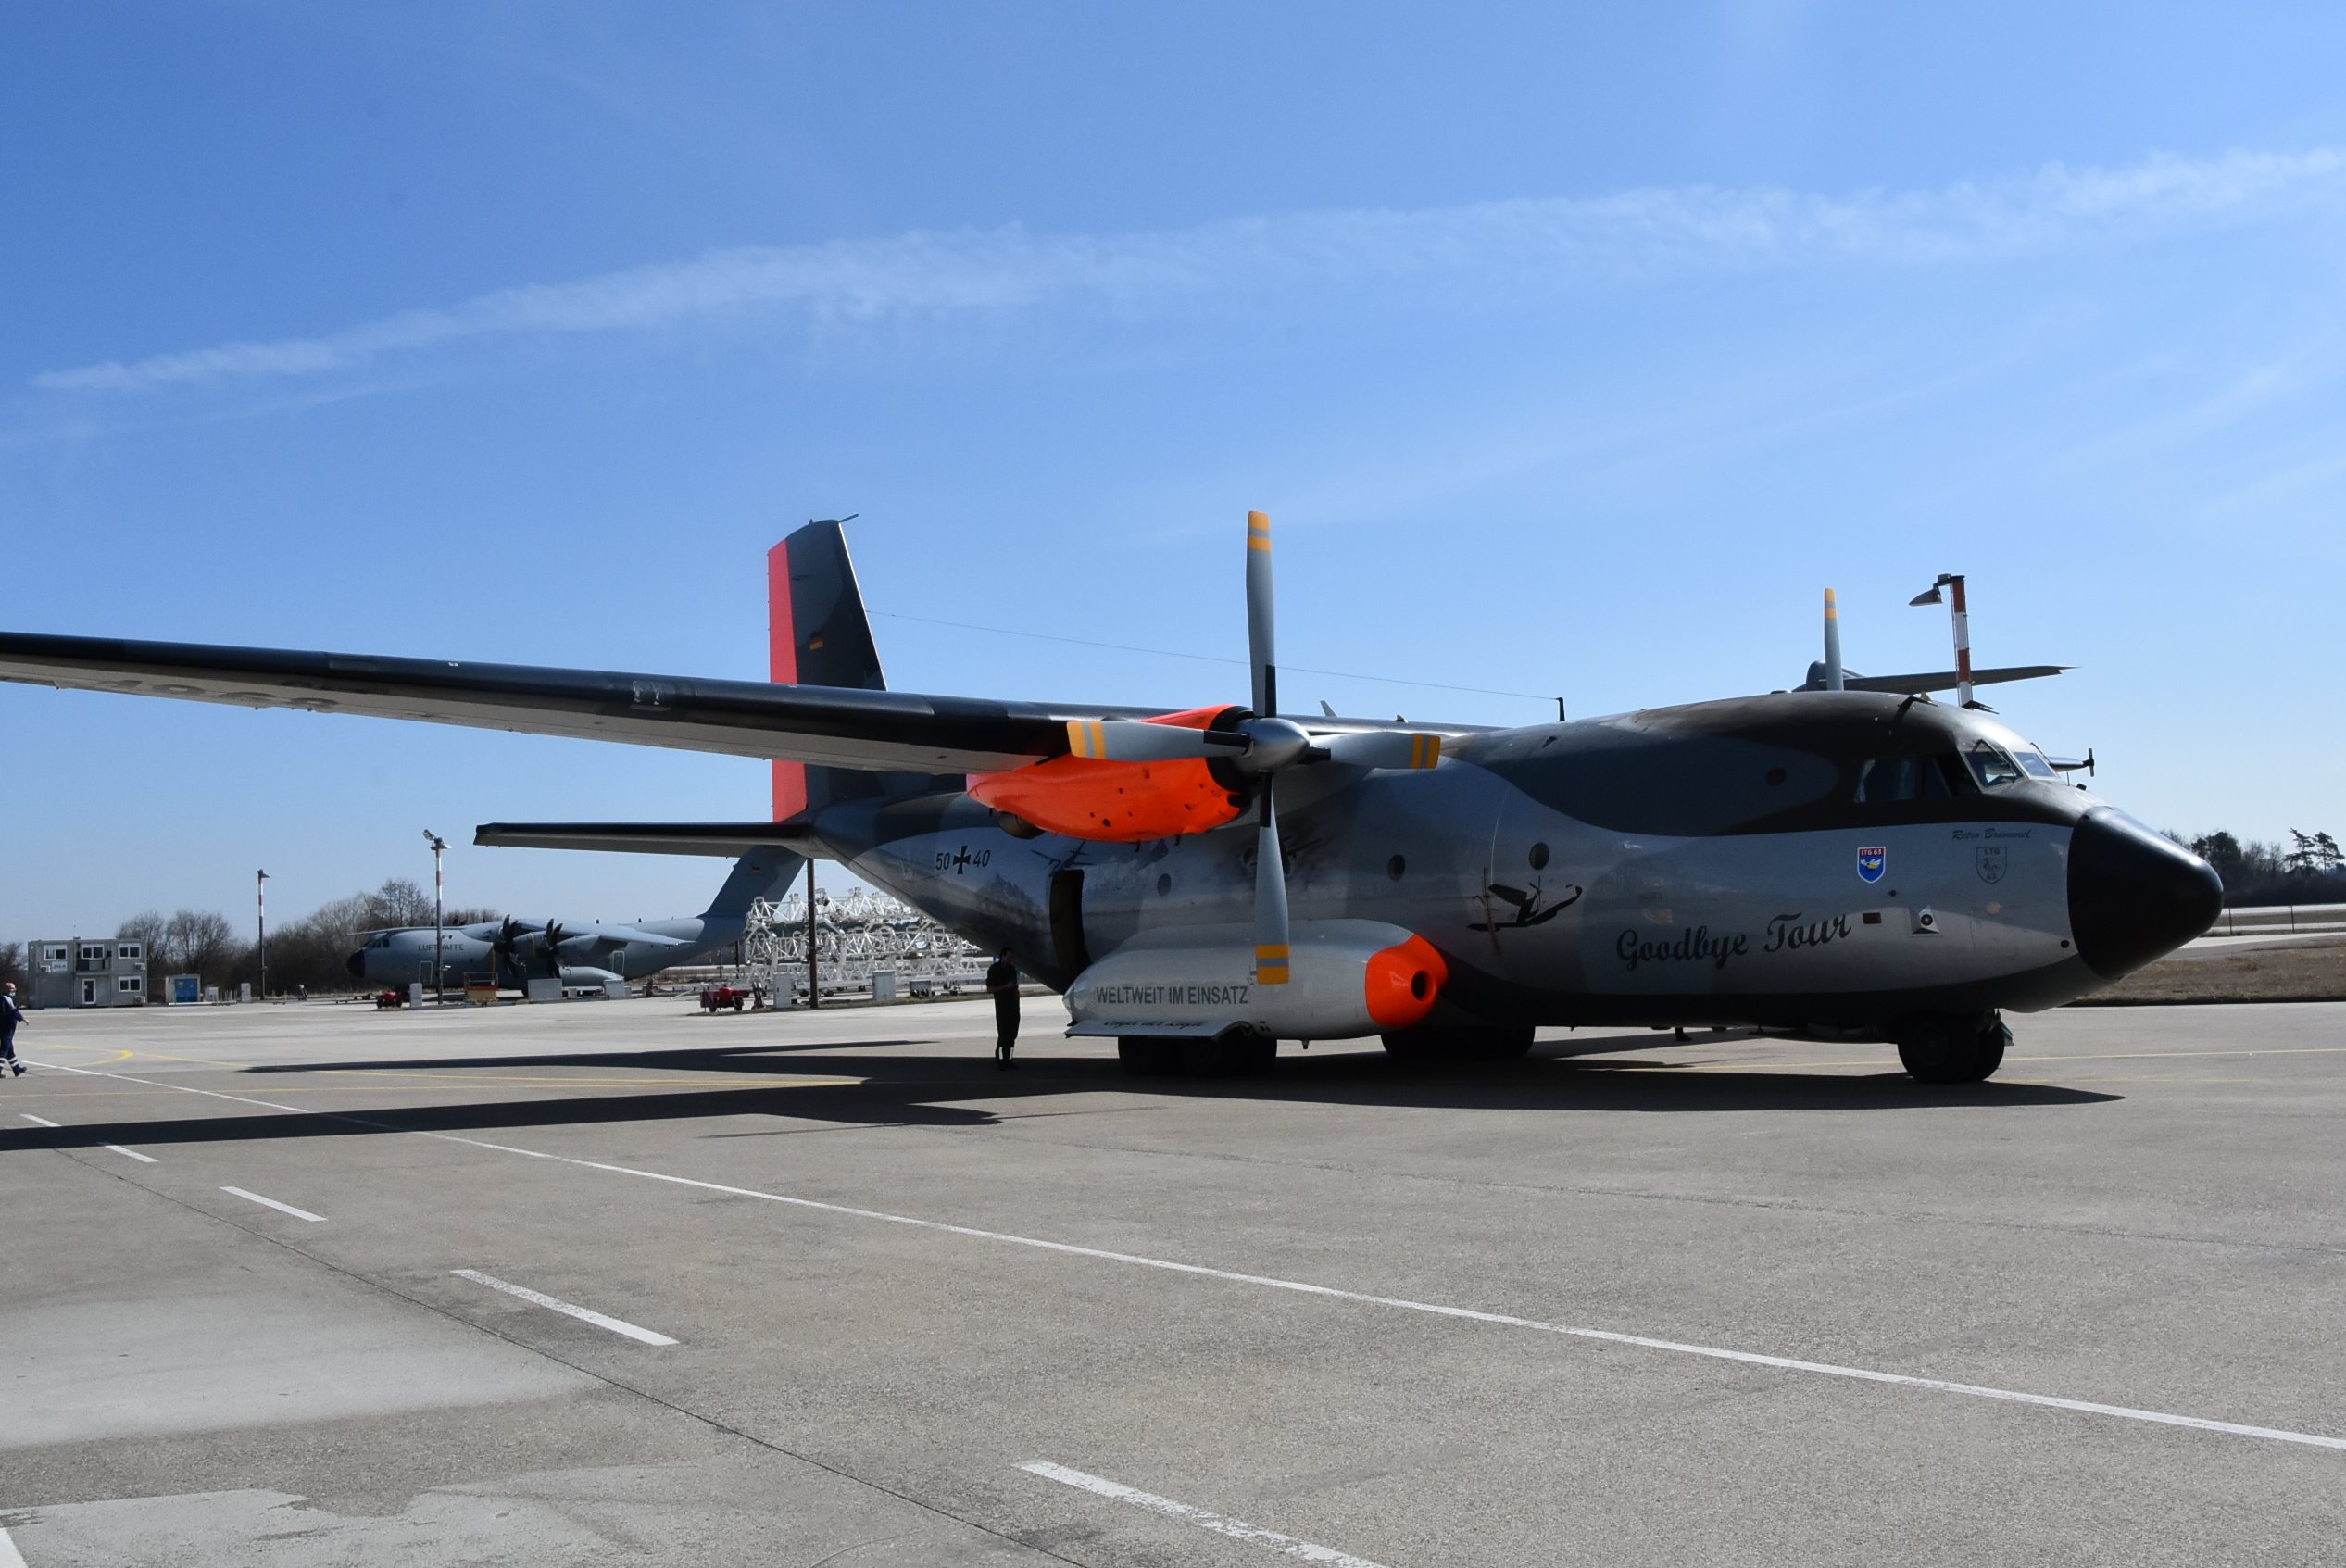 Airbus Delivers Last Overhauled C-160 Transall to German Air Force